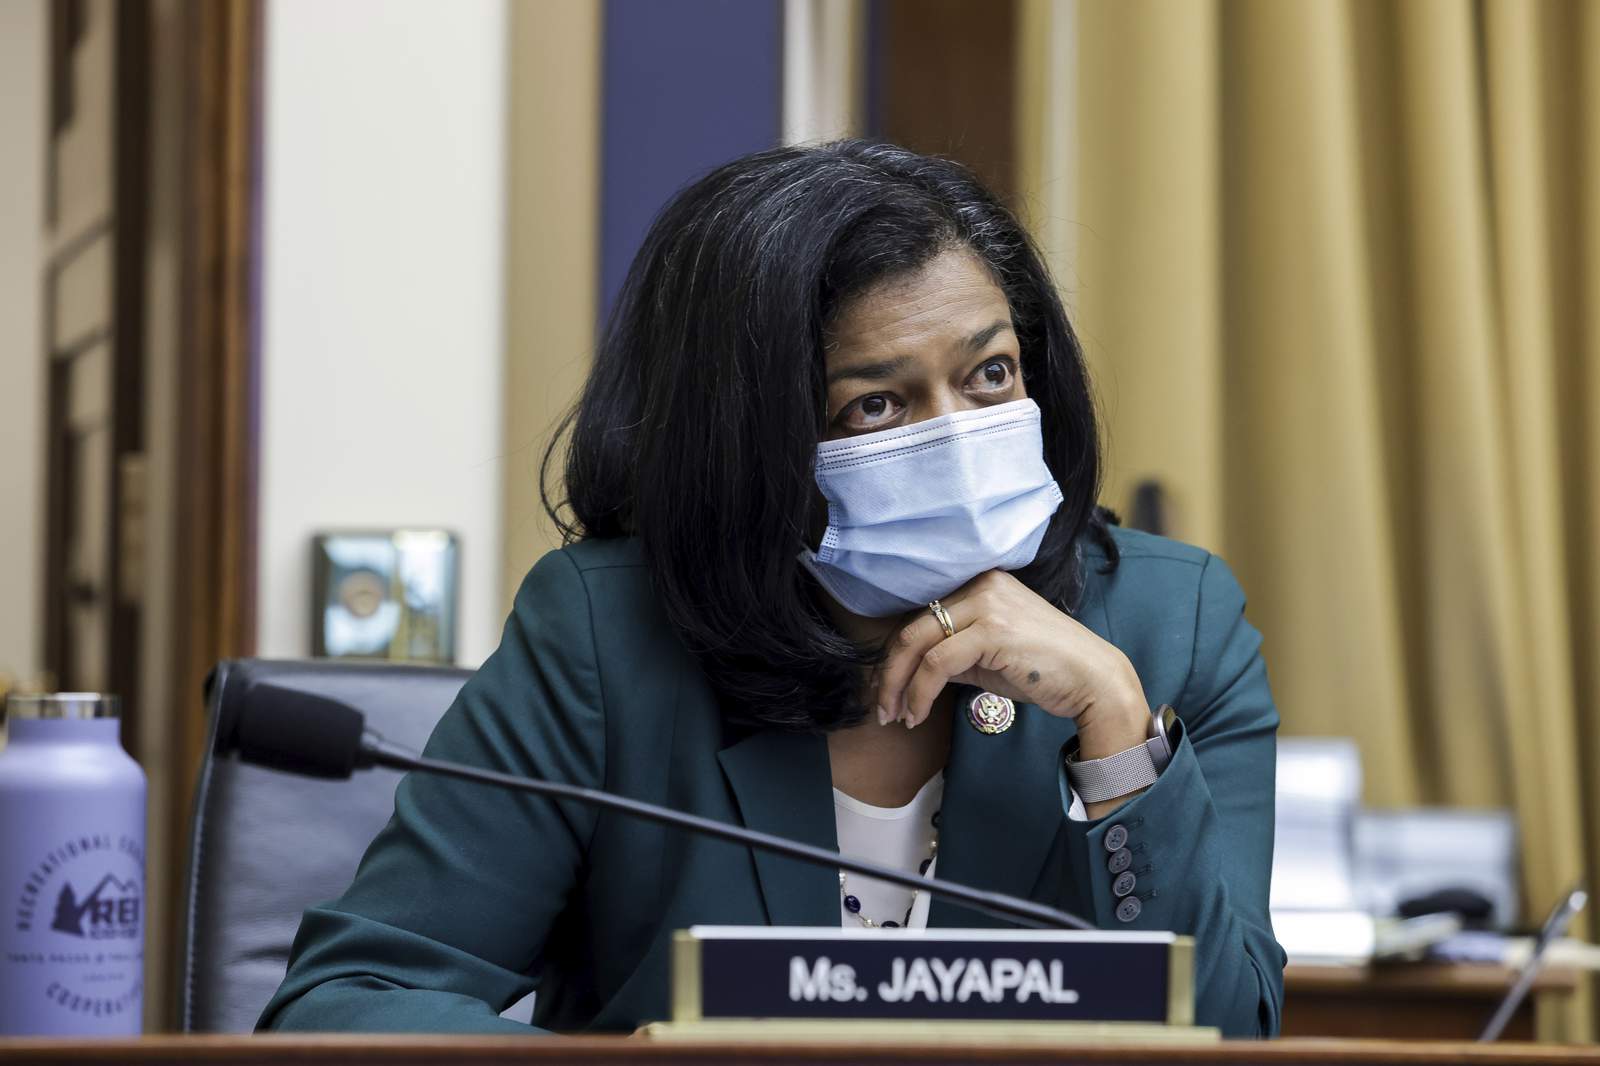 Congress members could face $1,000 fine for not wearing a face mask under proposed legislation